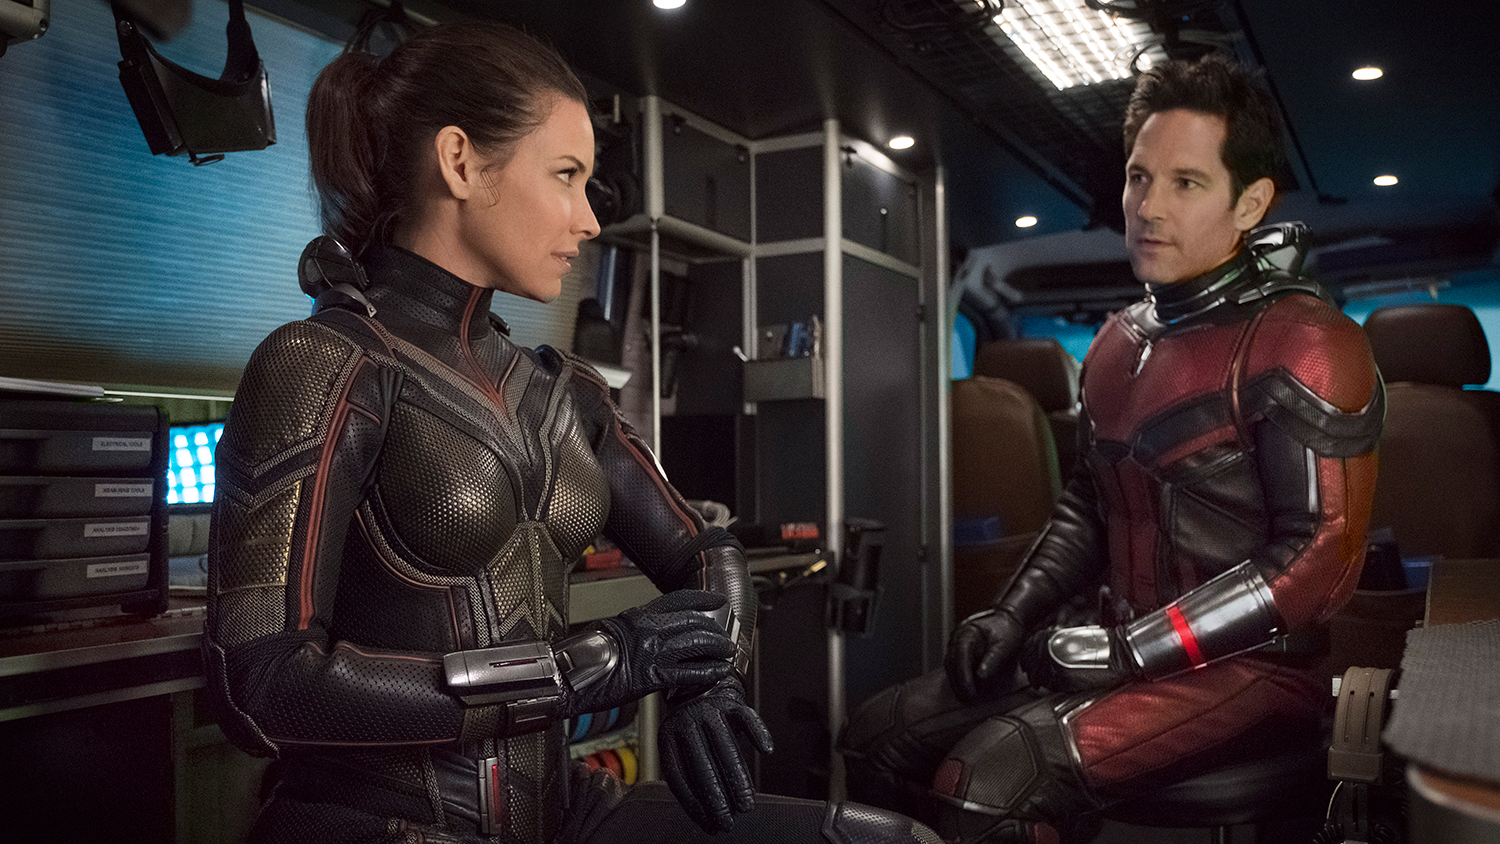 Evageline Lilly and Paul Rudd as The Wasp and Ant-Man talking inside a van in Ant-Man and the Wasp.